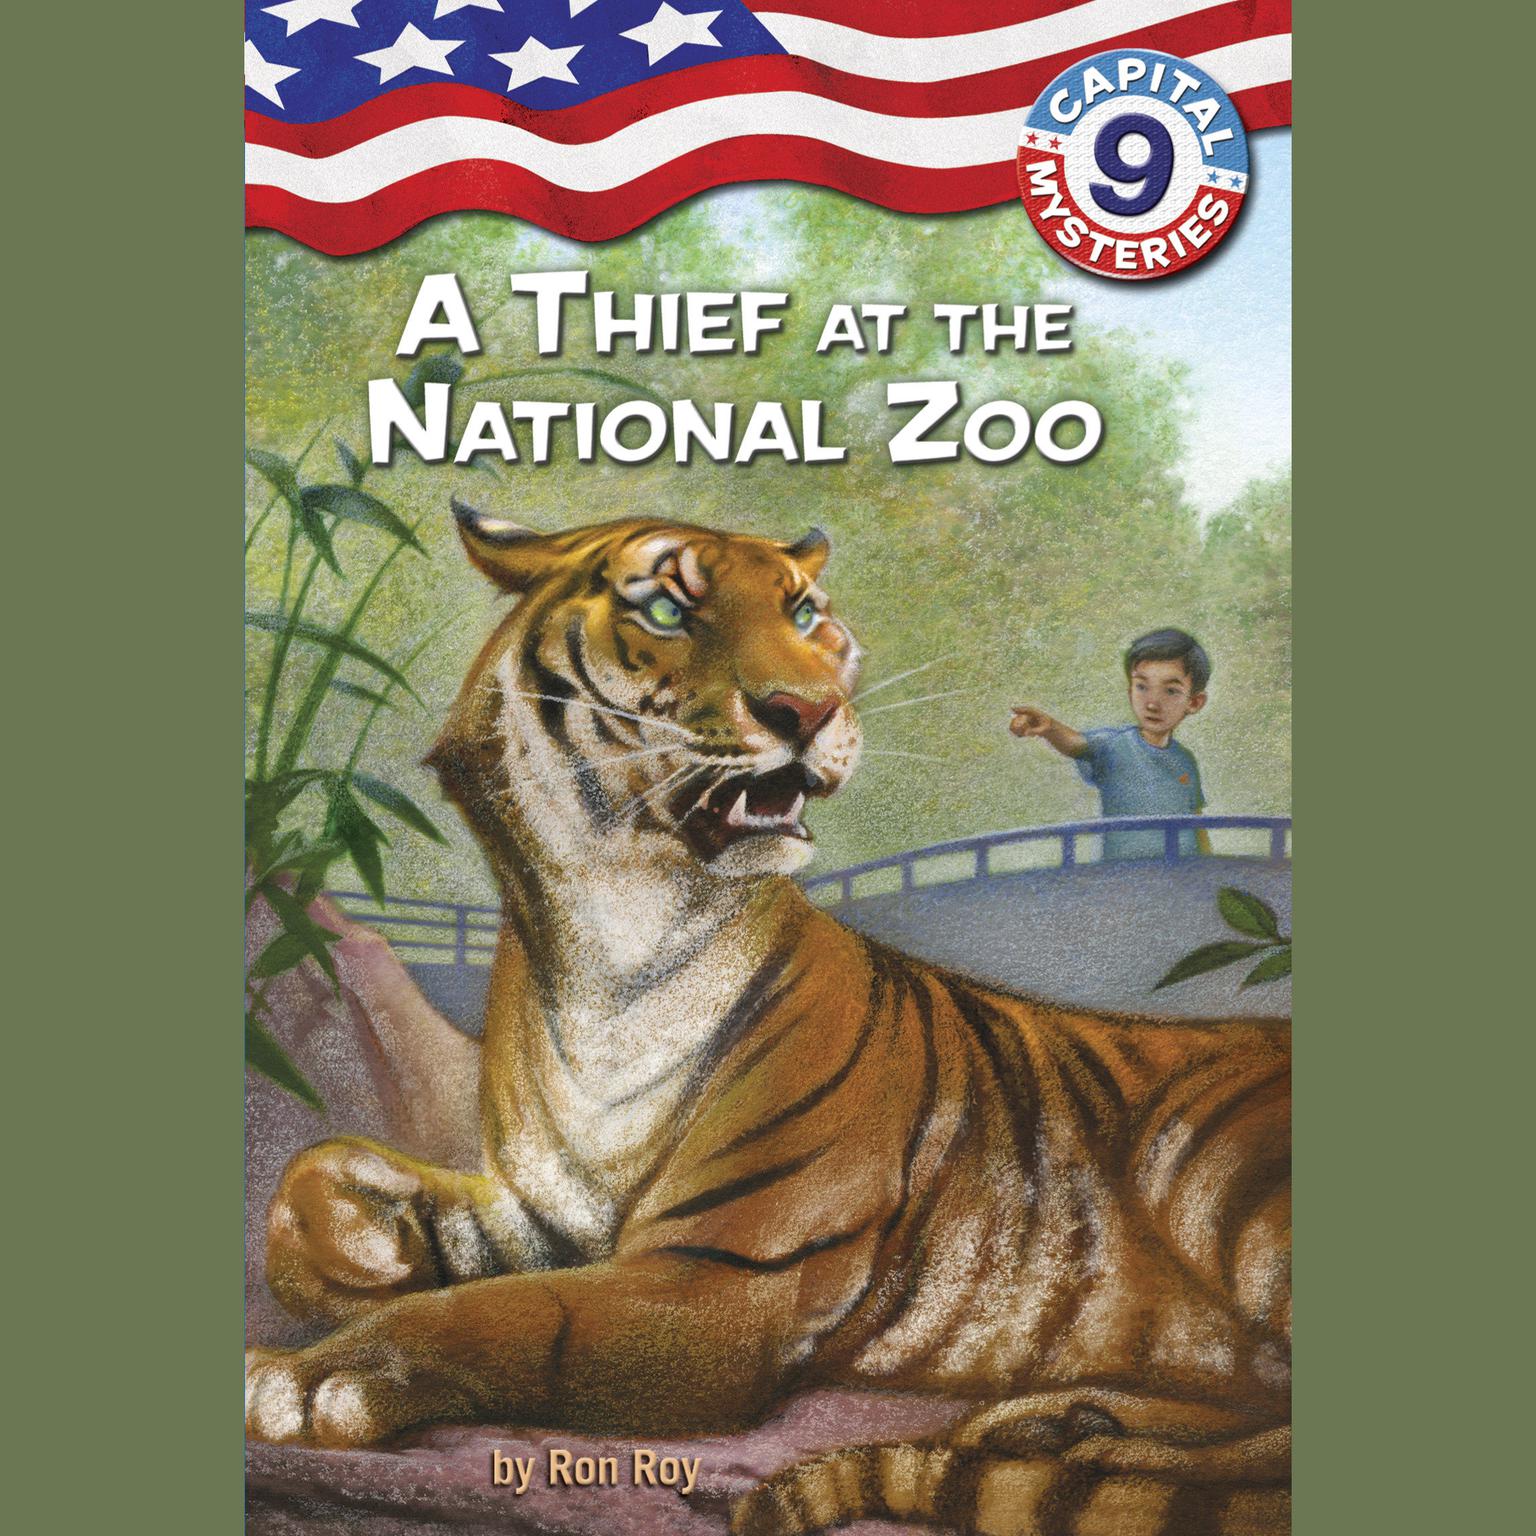 Capital Mysteries #9: A Thief at the National Zoo Audiobook, by Ron Roy